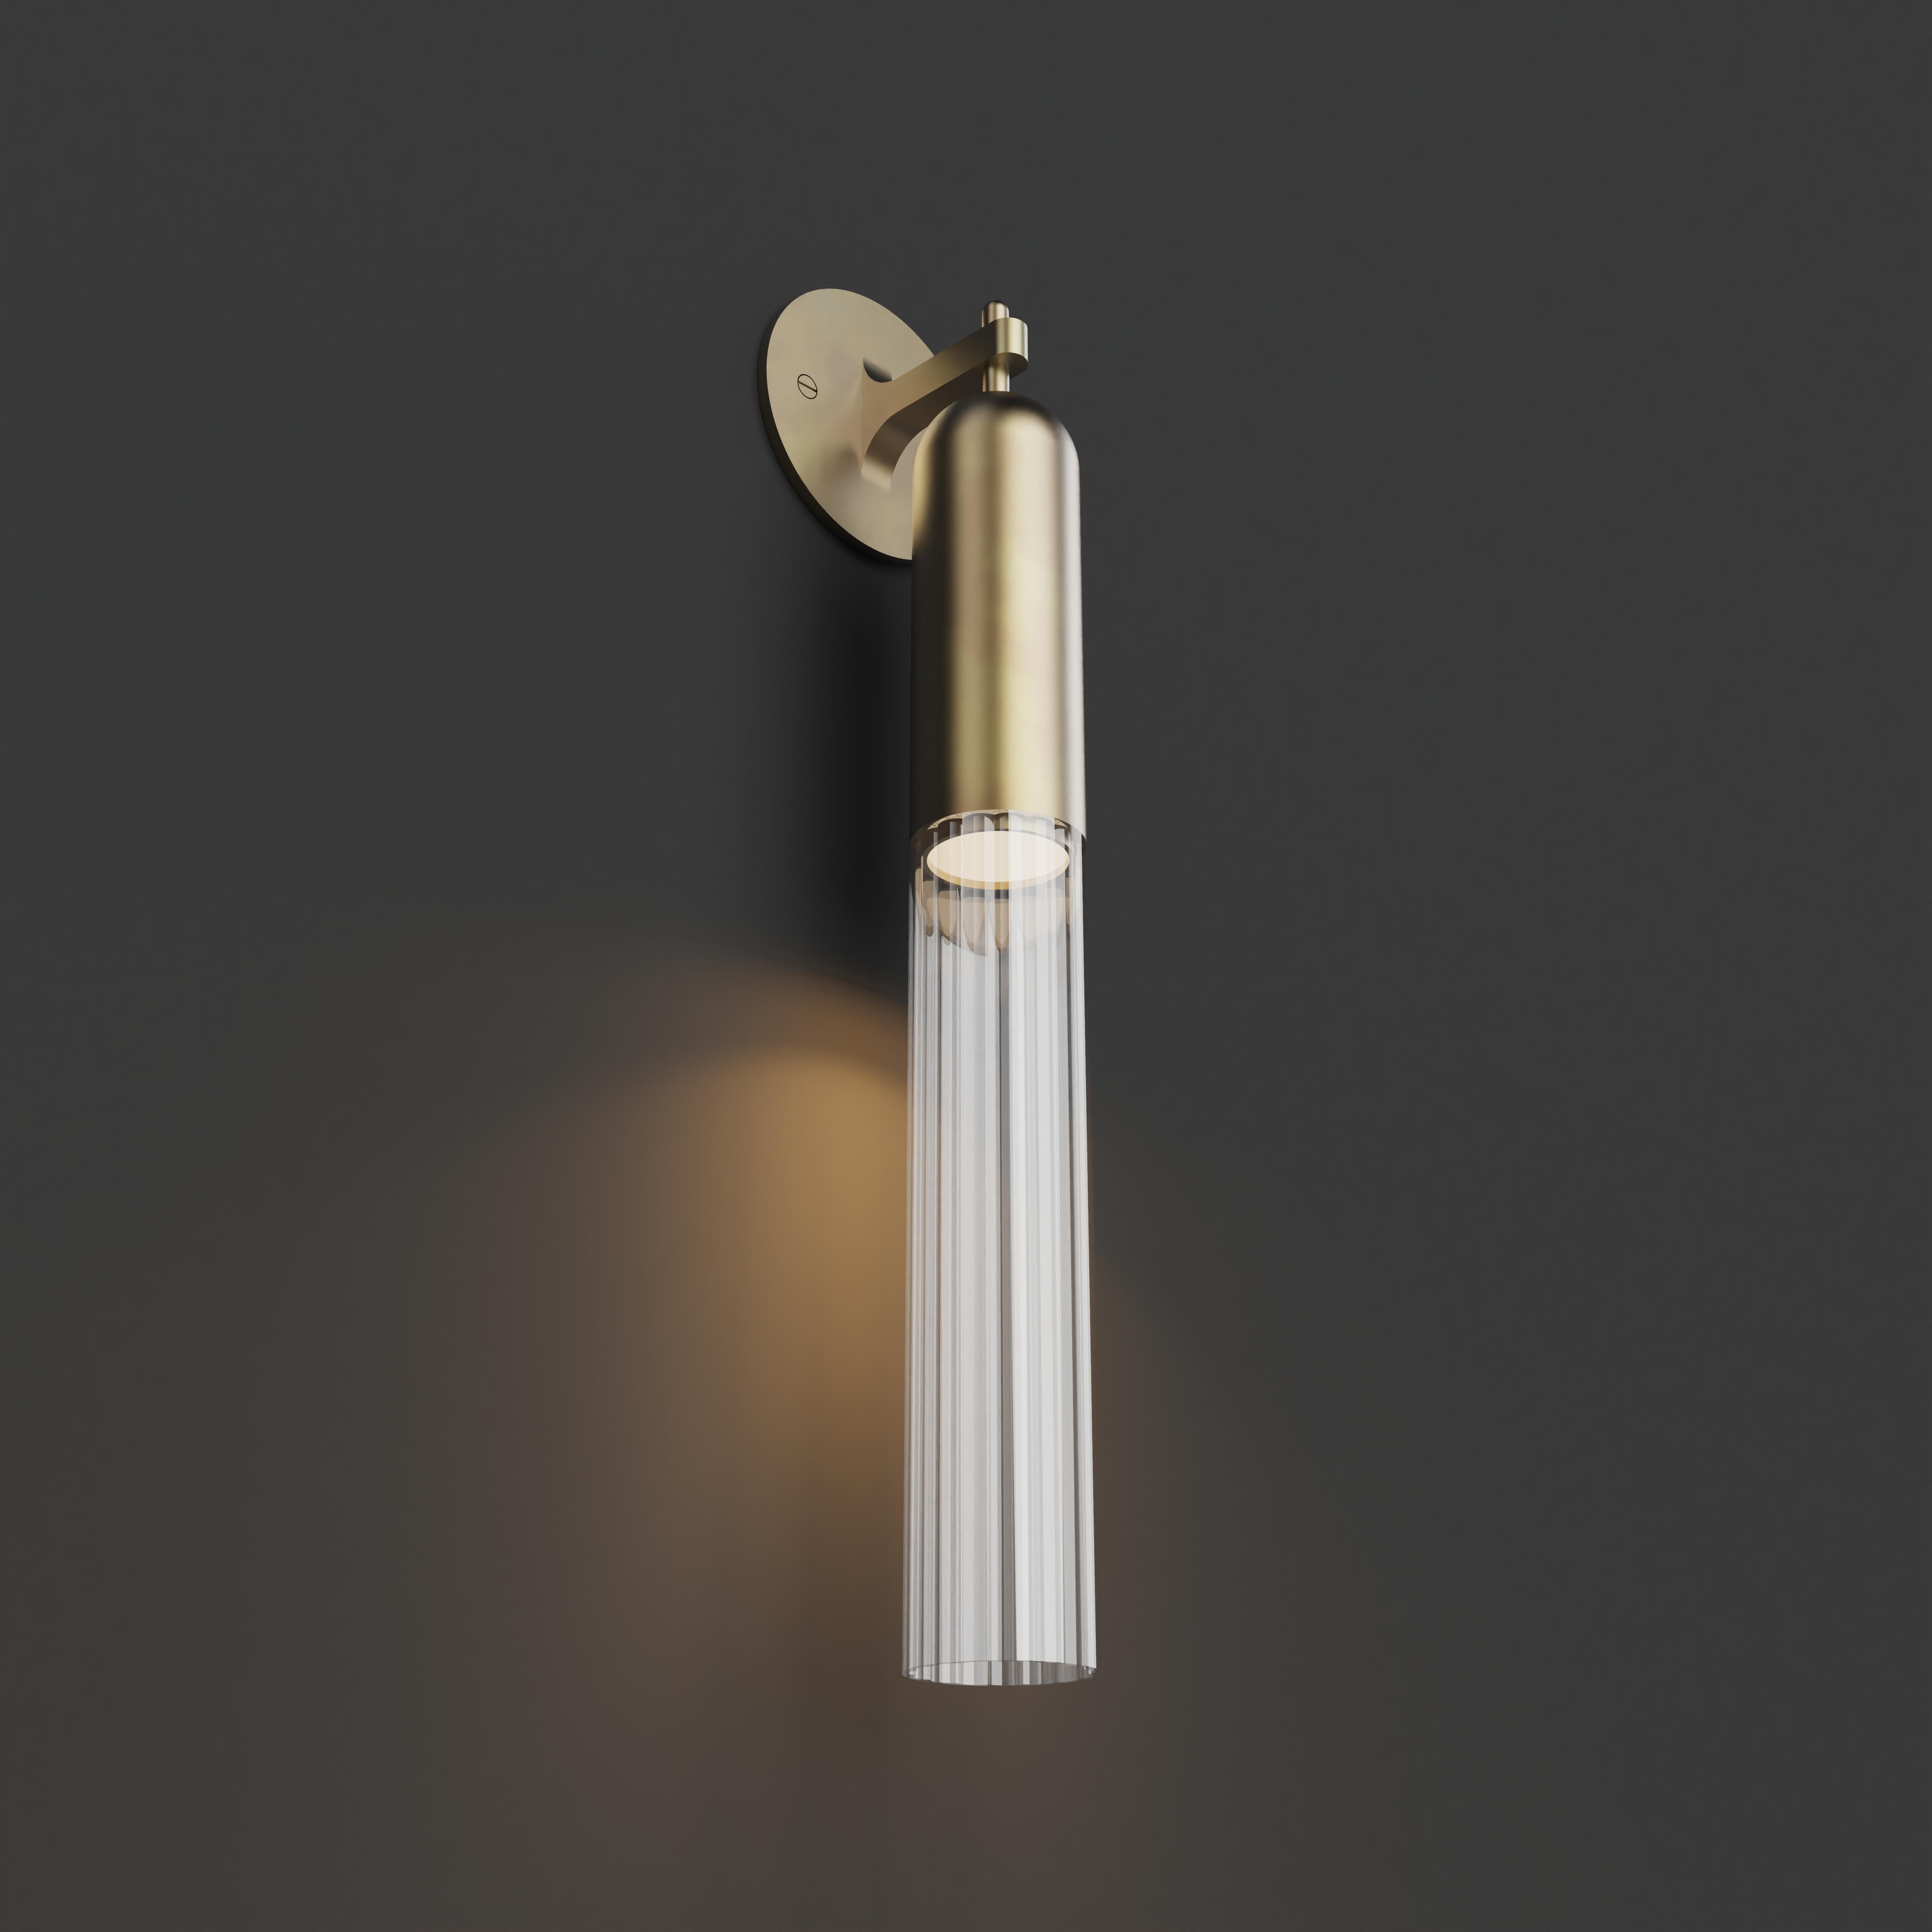 European Imagin Rigata Wall Light in Brushed Brass and Fluted Glass For Sale